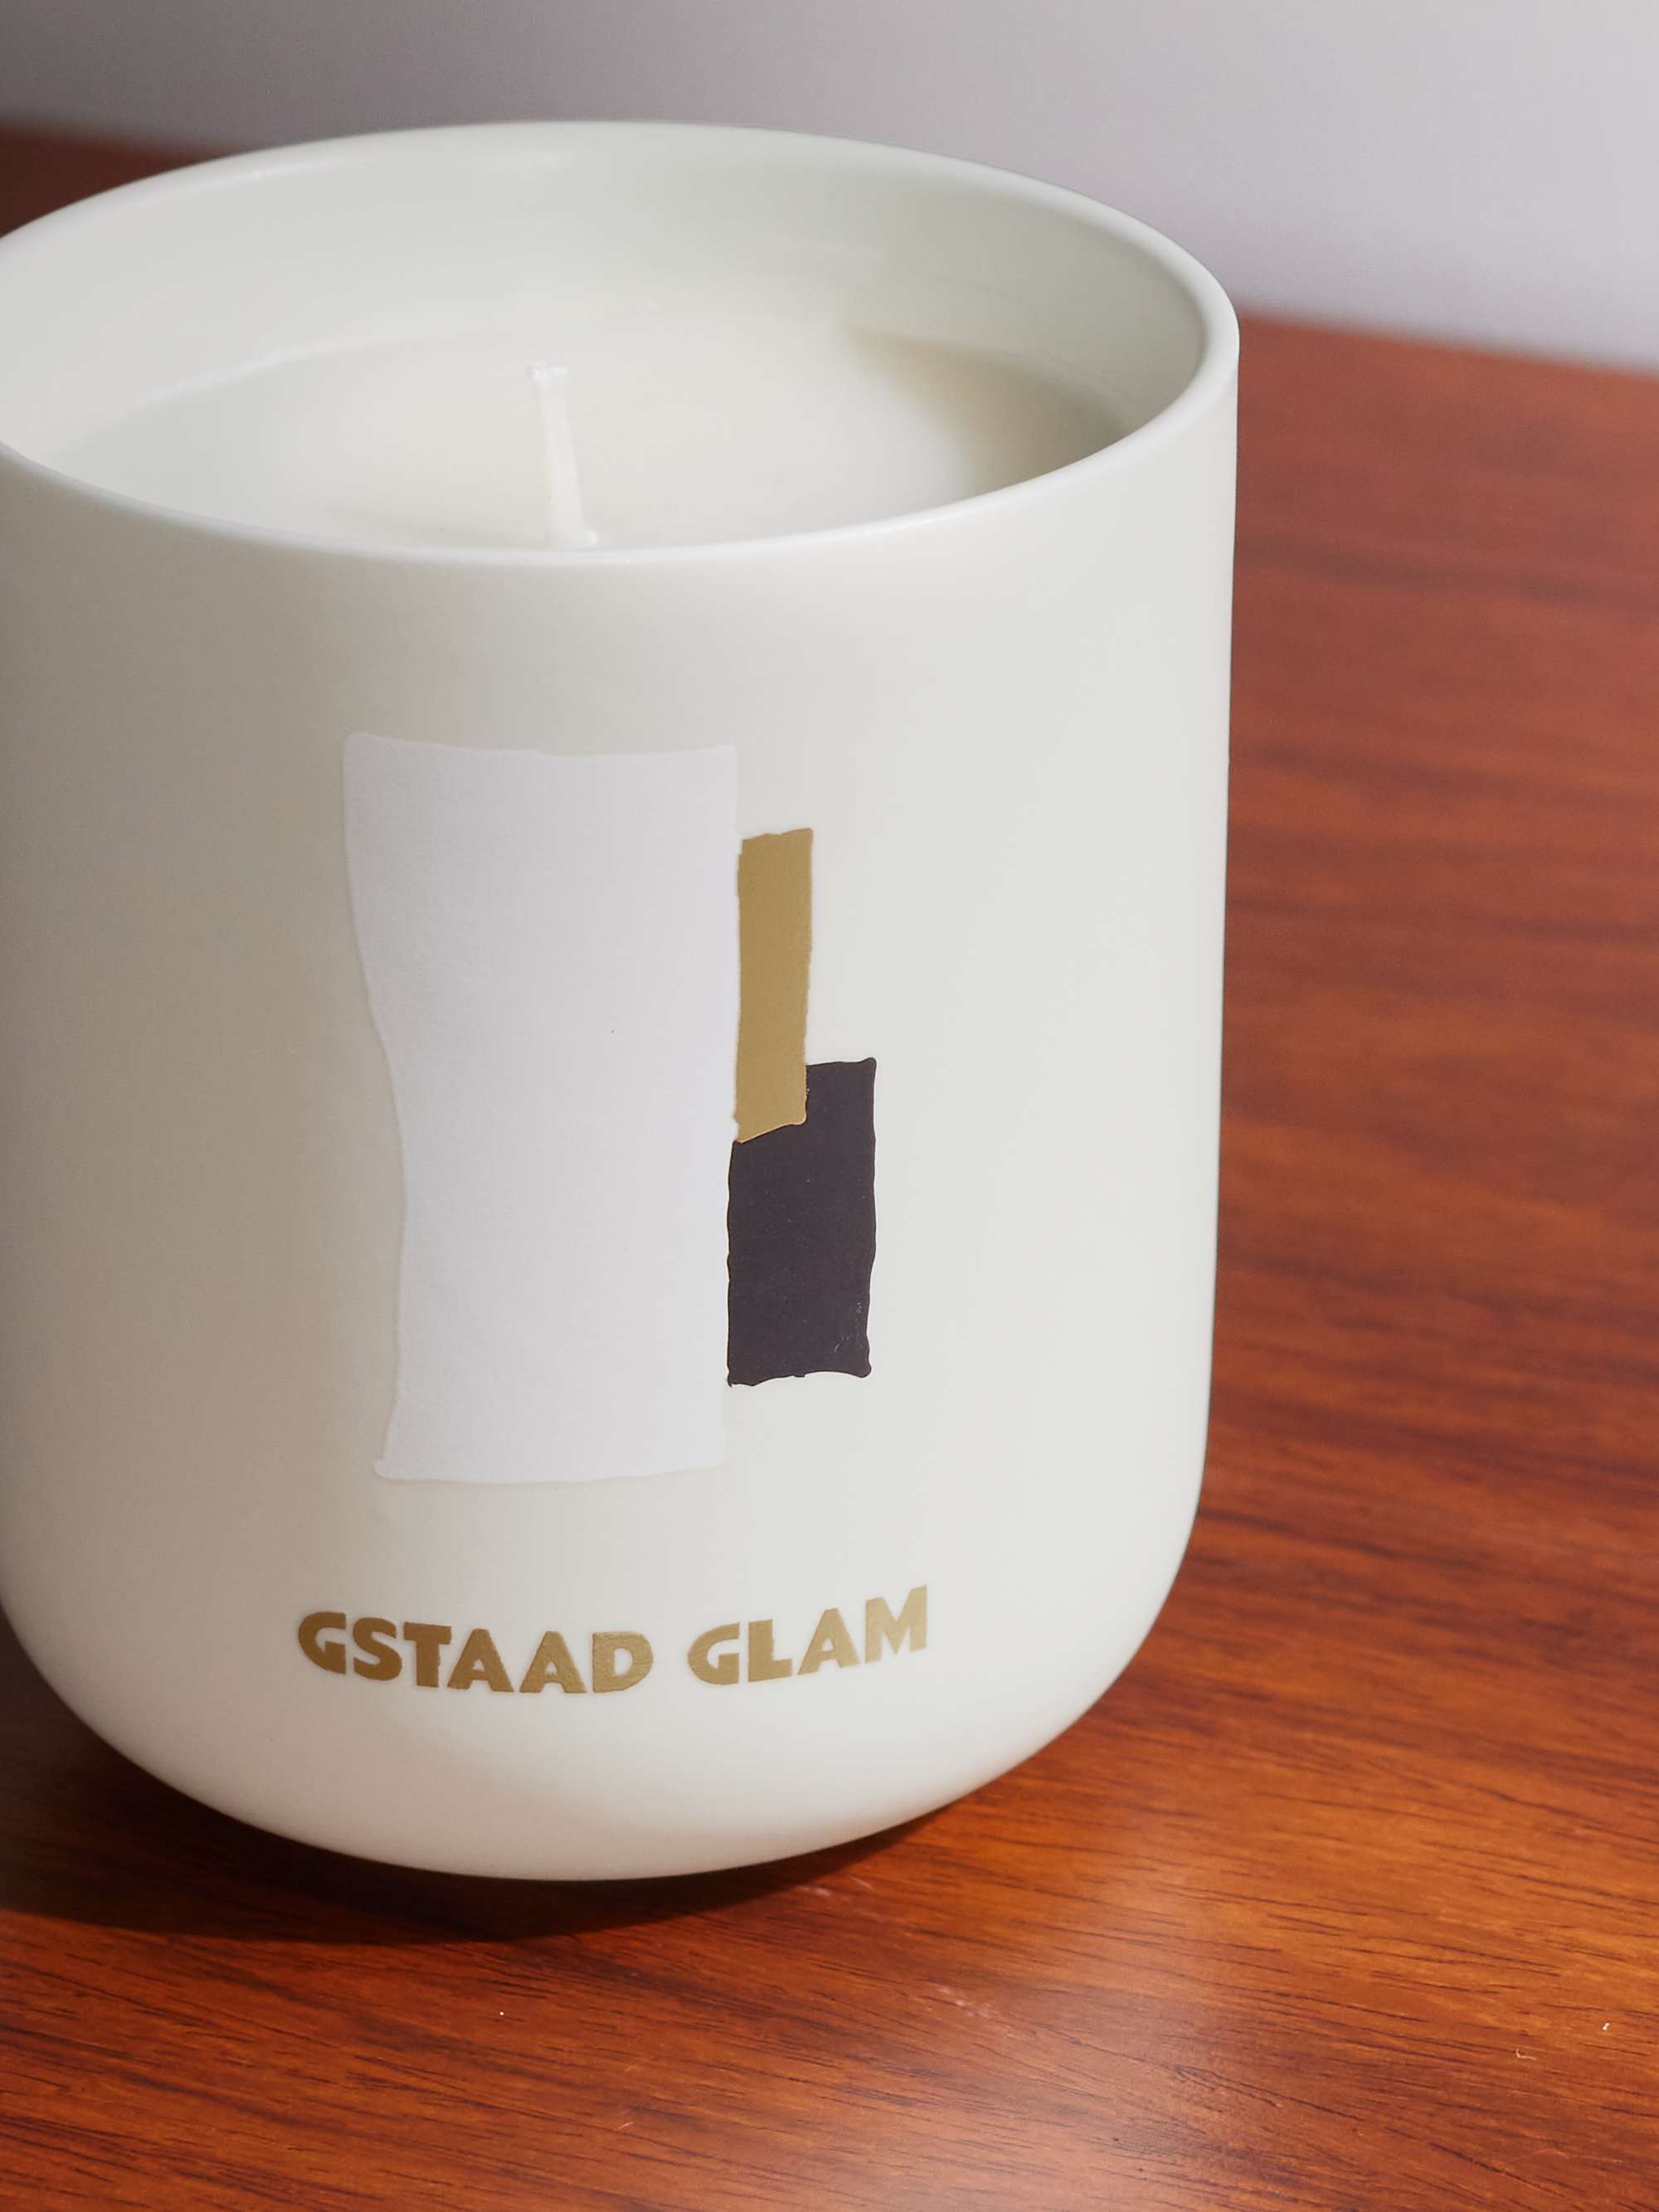 ASSOULINE Gstaad Glam Scented Candle, 319g